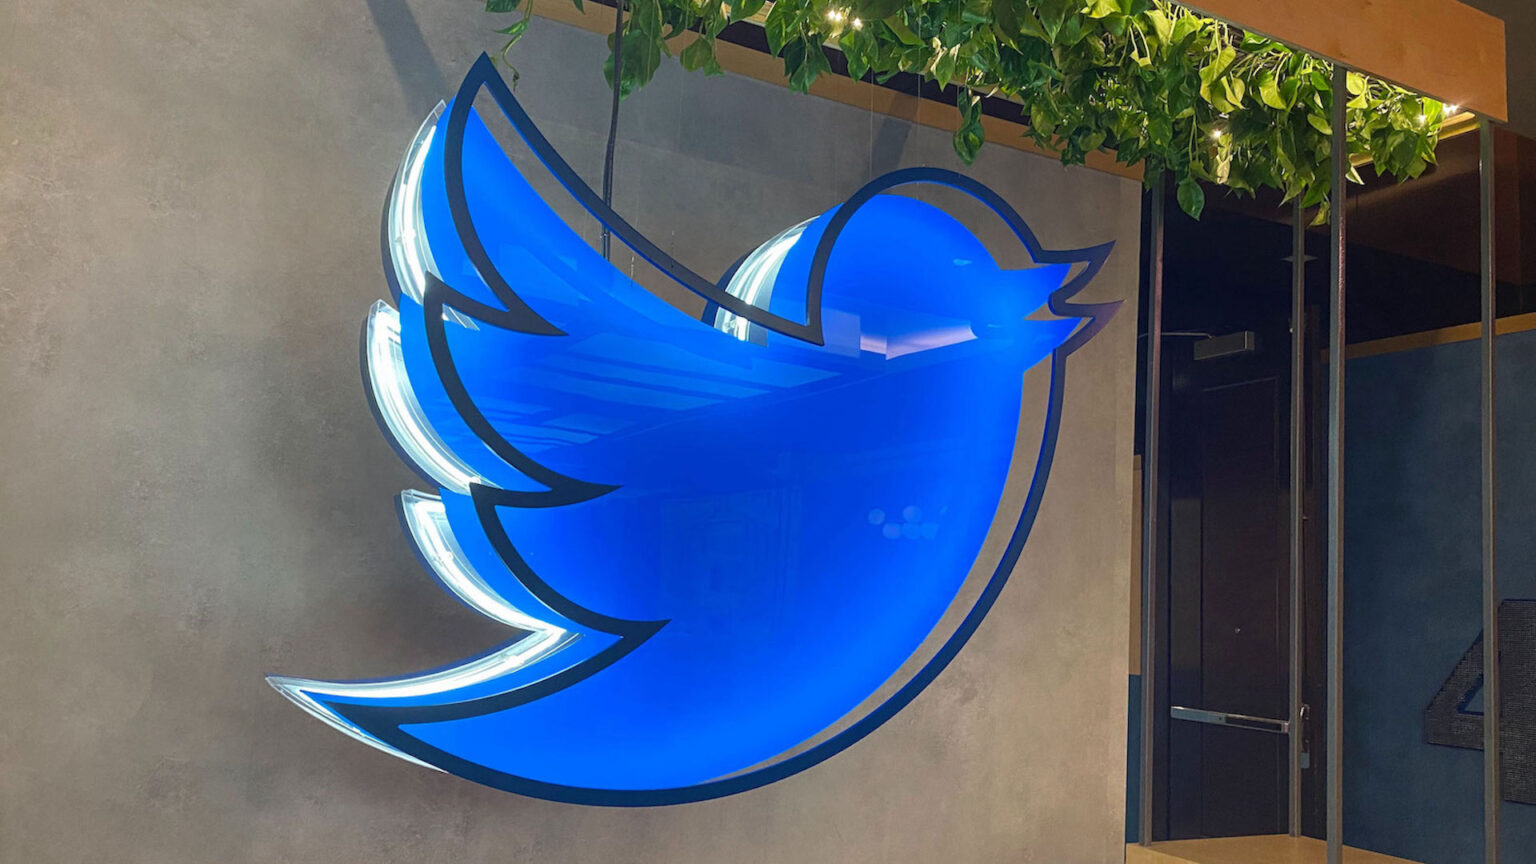 Twitter is exploring subscription fees and an ad-free experience. What does it mean for its app users? Read all the new detail here.